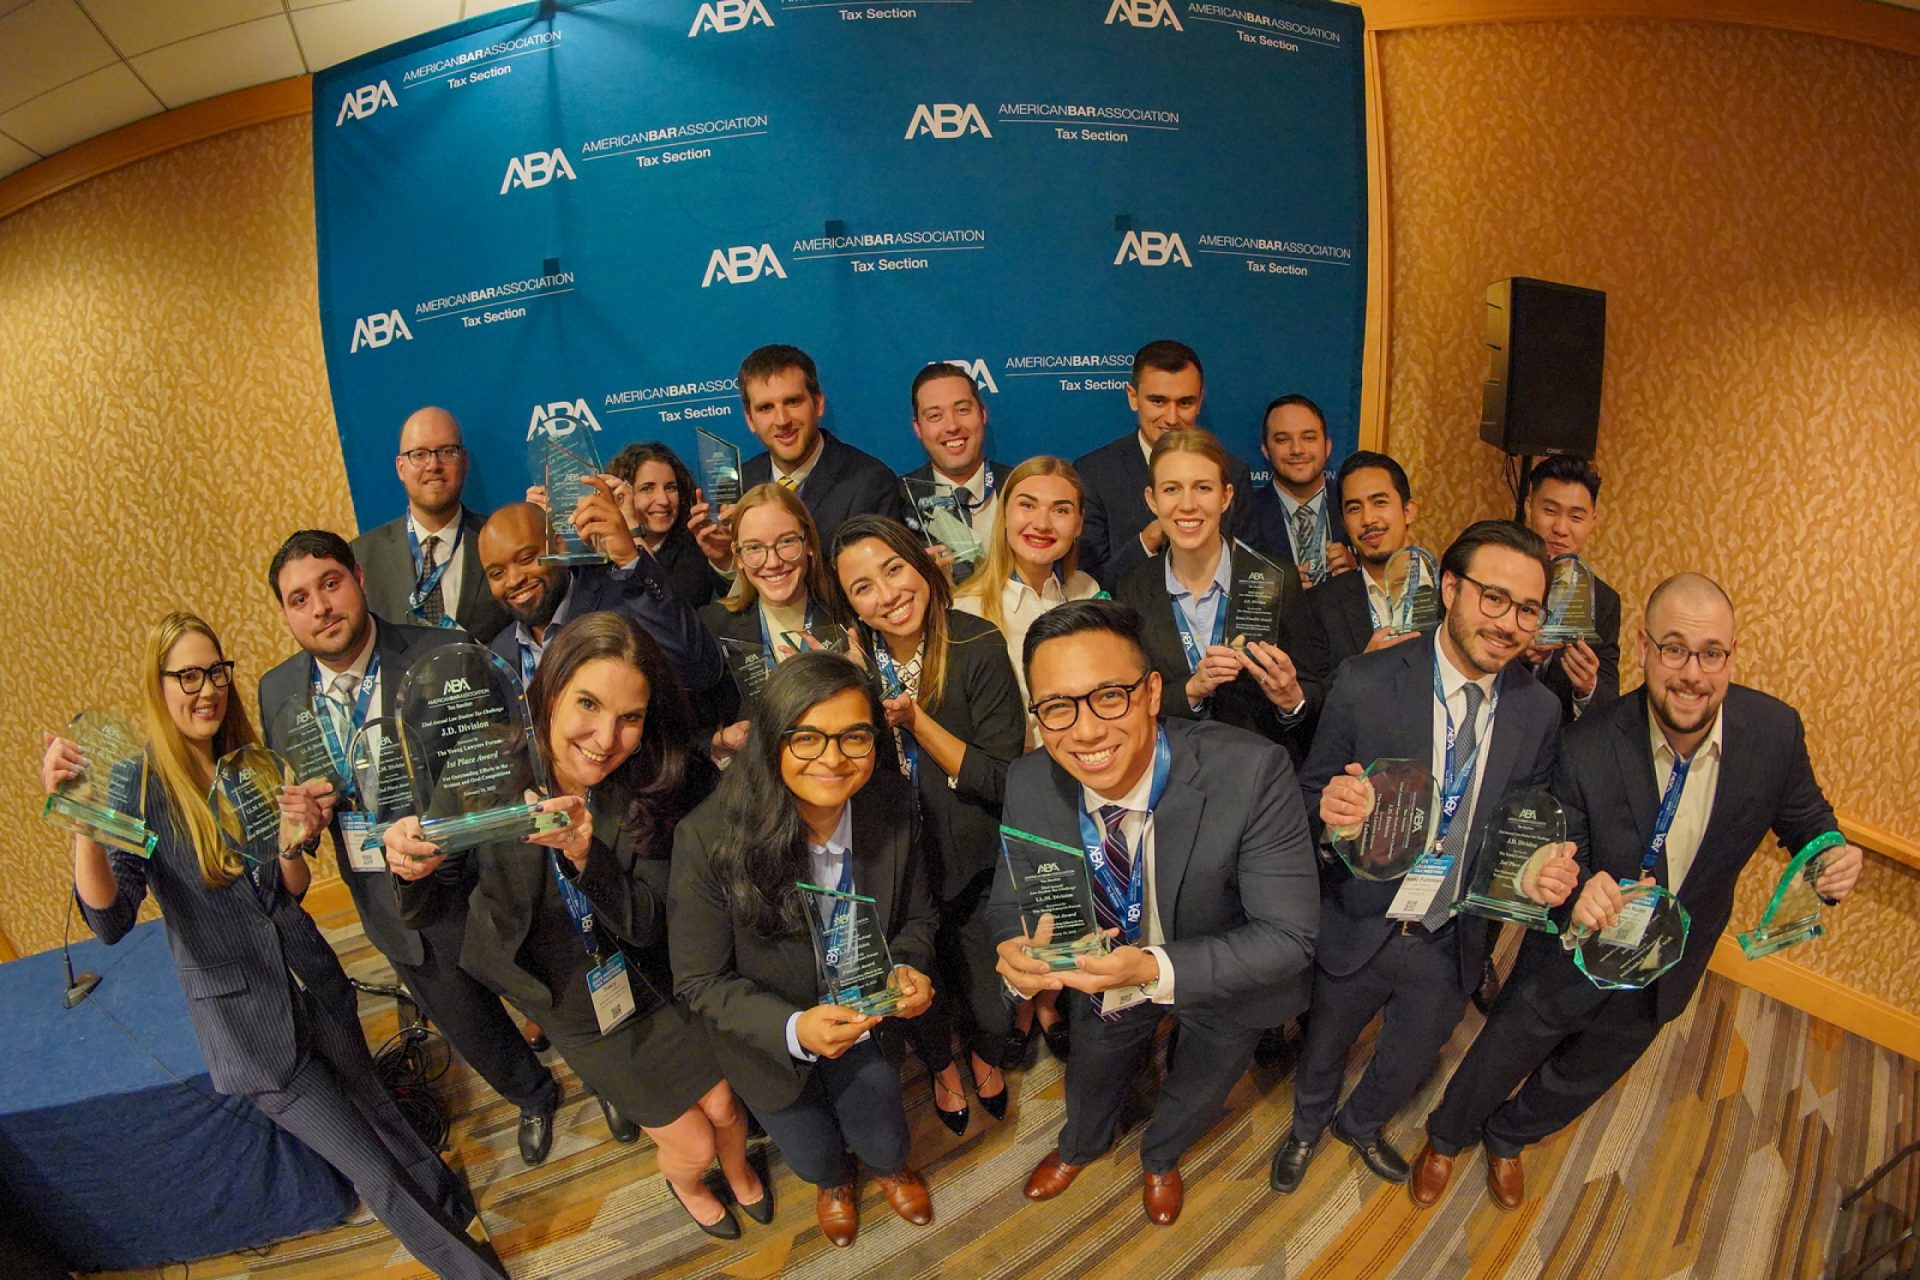 ABA Law Student Tax Challenge students holding up their awards and smiling at the camera